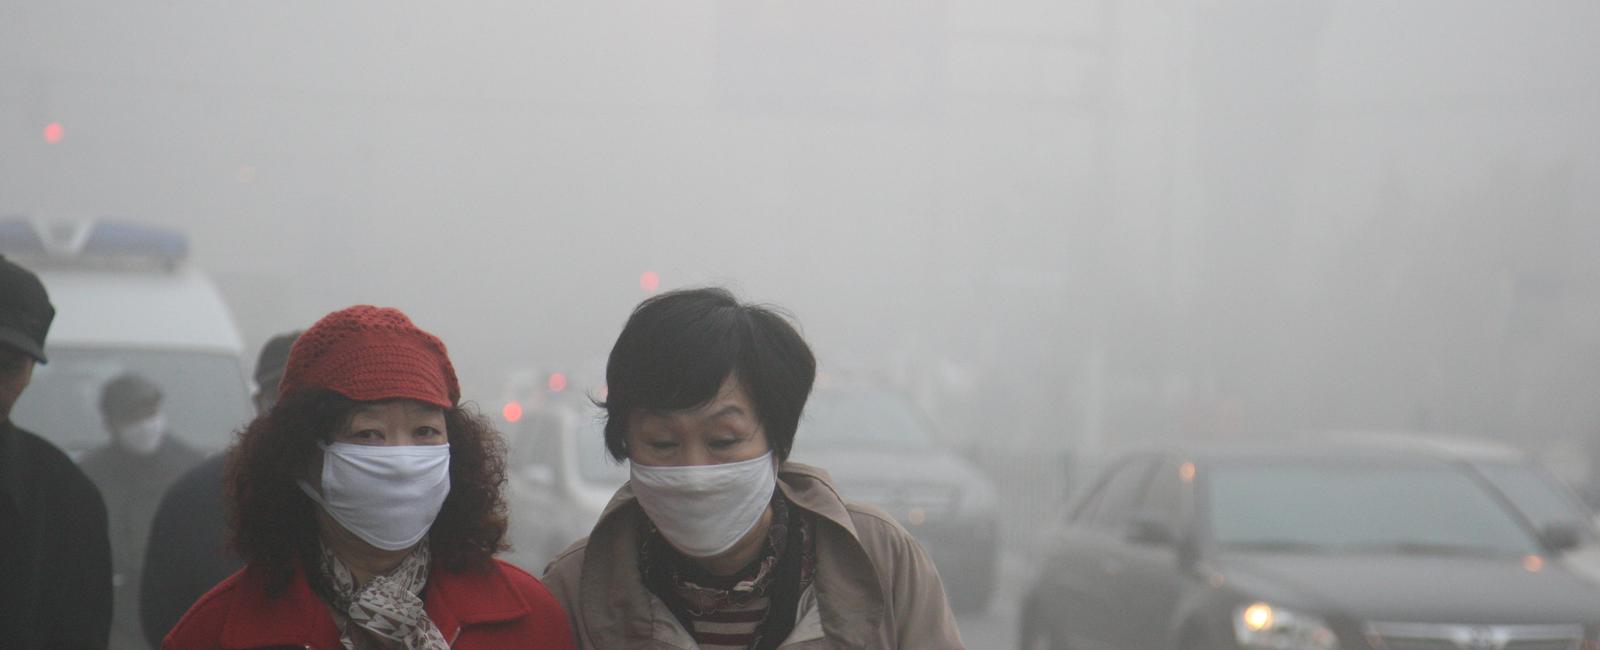 Air pollution in china can increase the snowfall in california